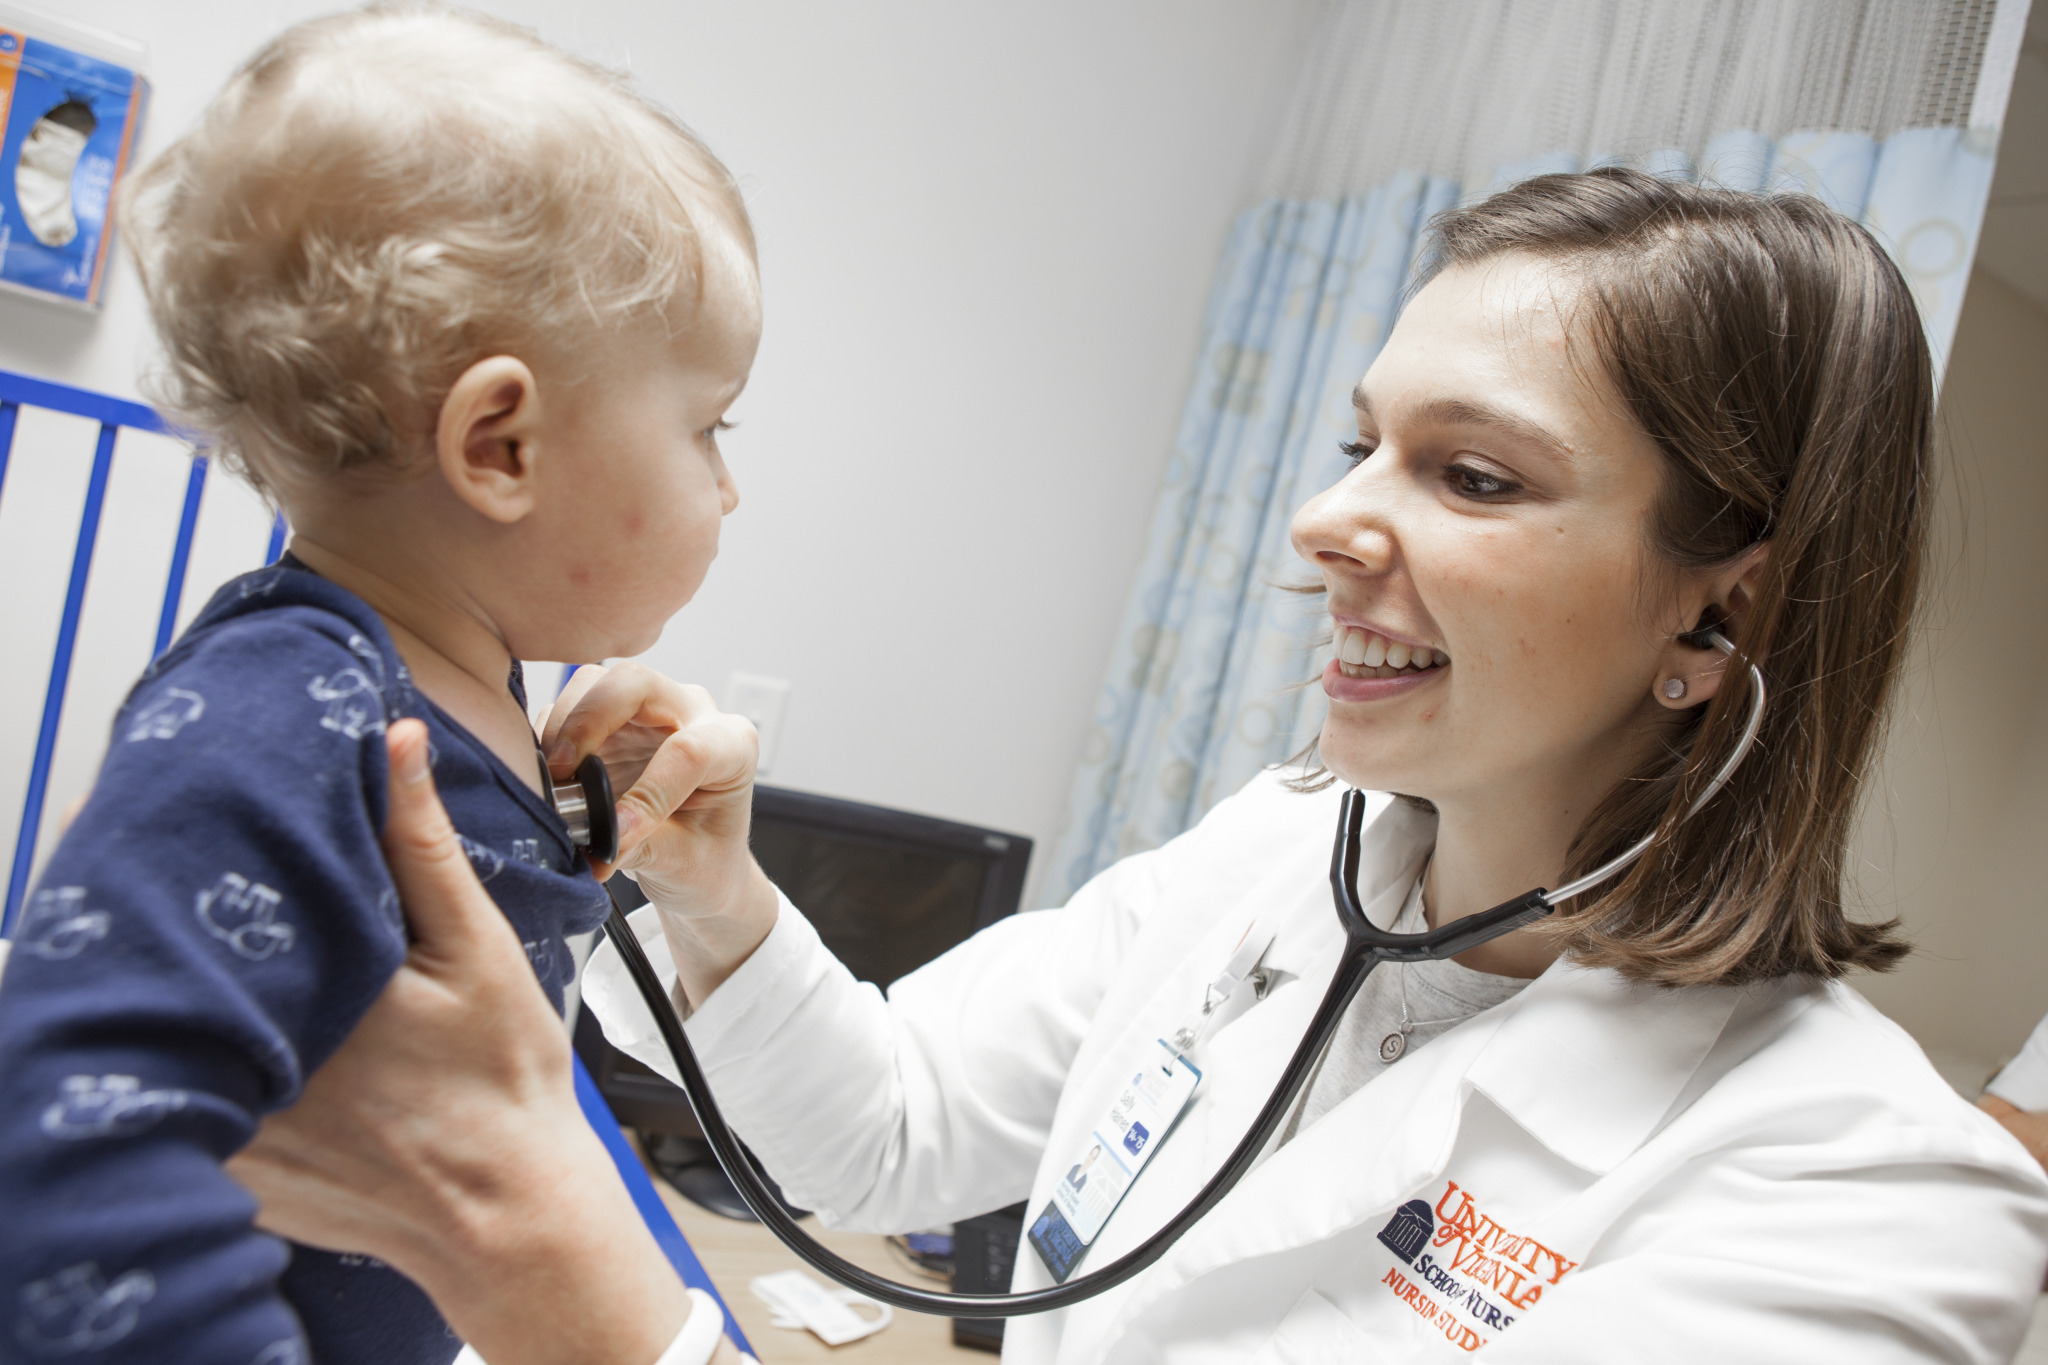 An image of a nurse practitioner assessing a small child with her stethoscope in a clinic setting.